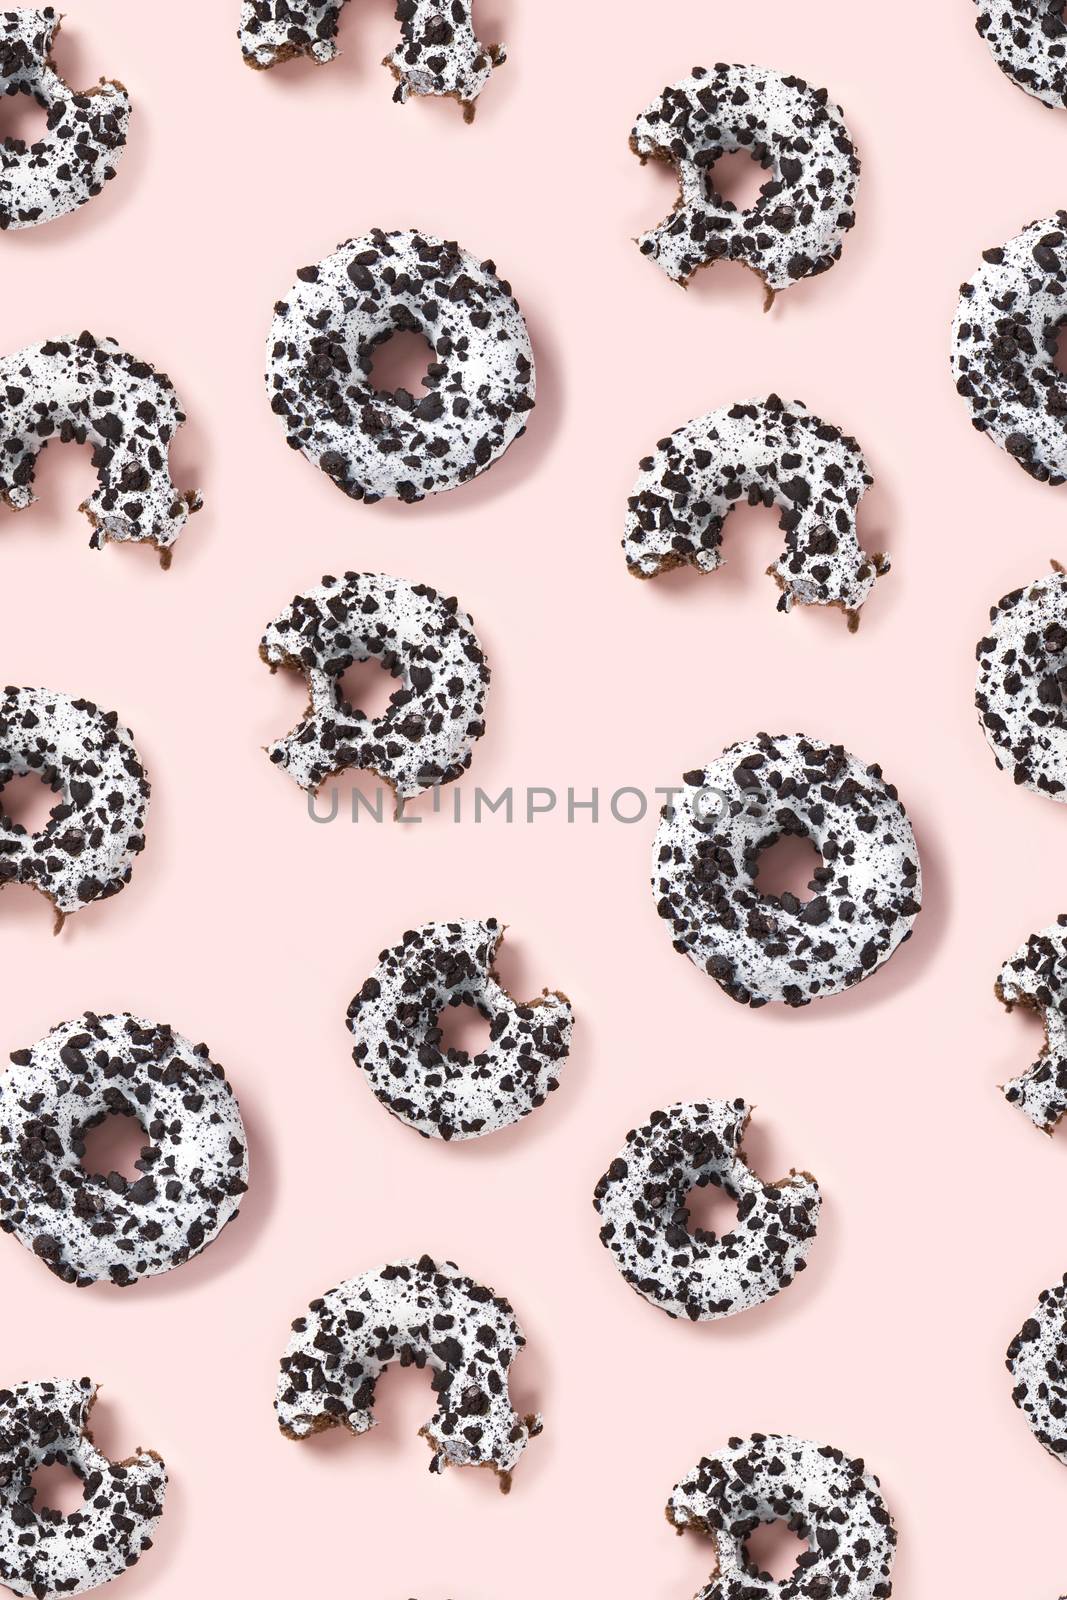 donuts on a pink background top view. Flat lay of delicious nibbled chocolate donuts. used as donut banner or poster background, not pattern